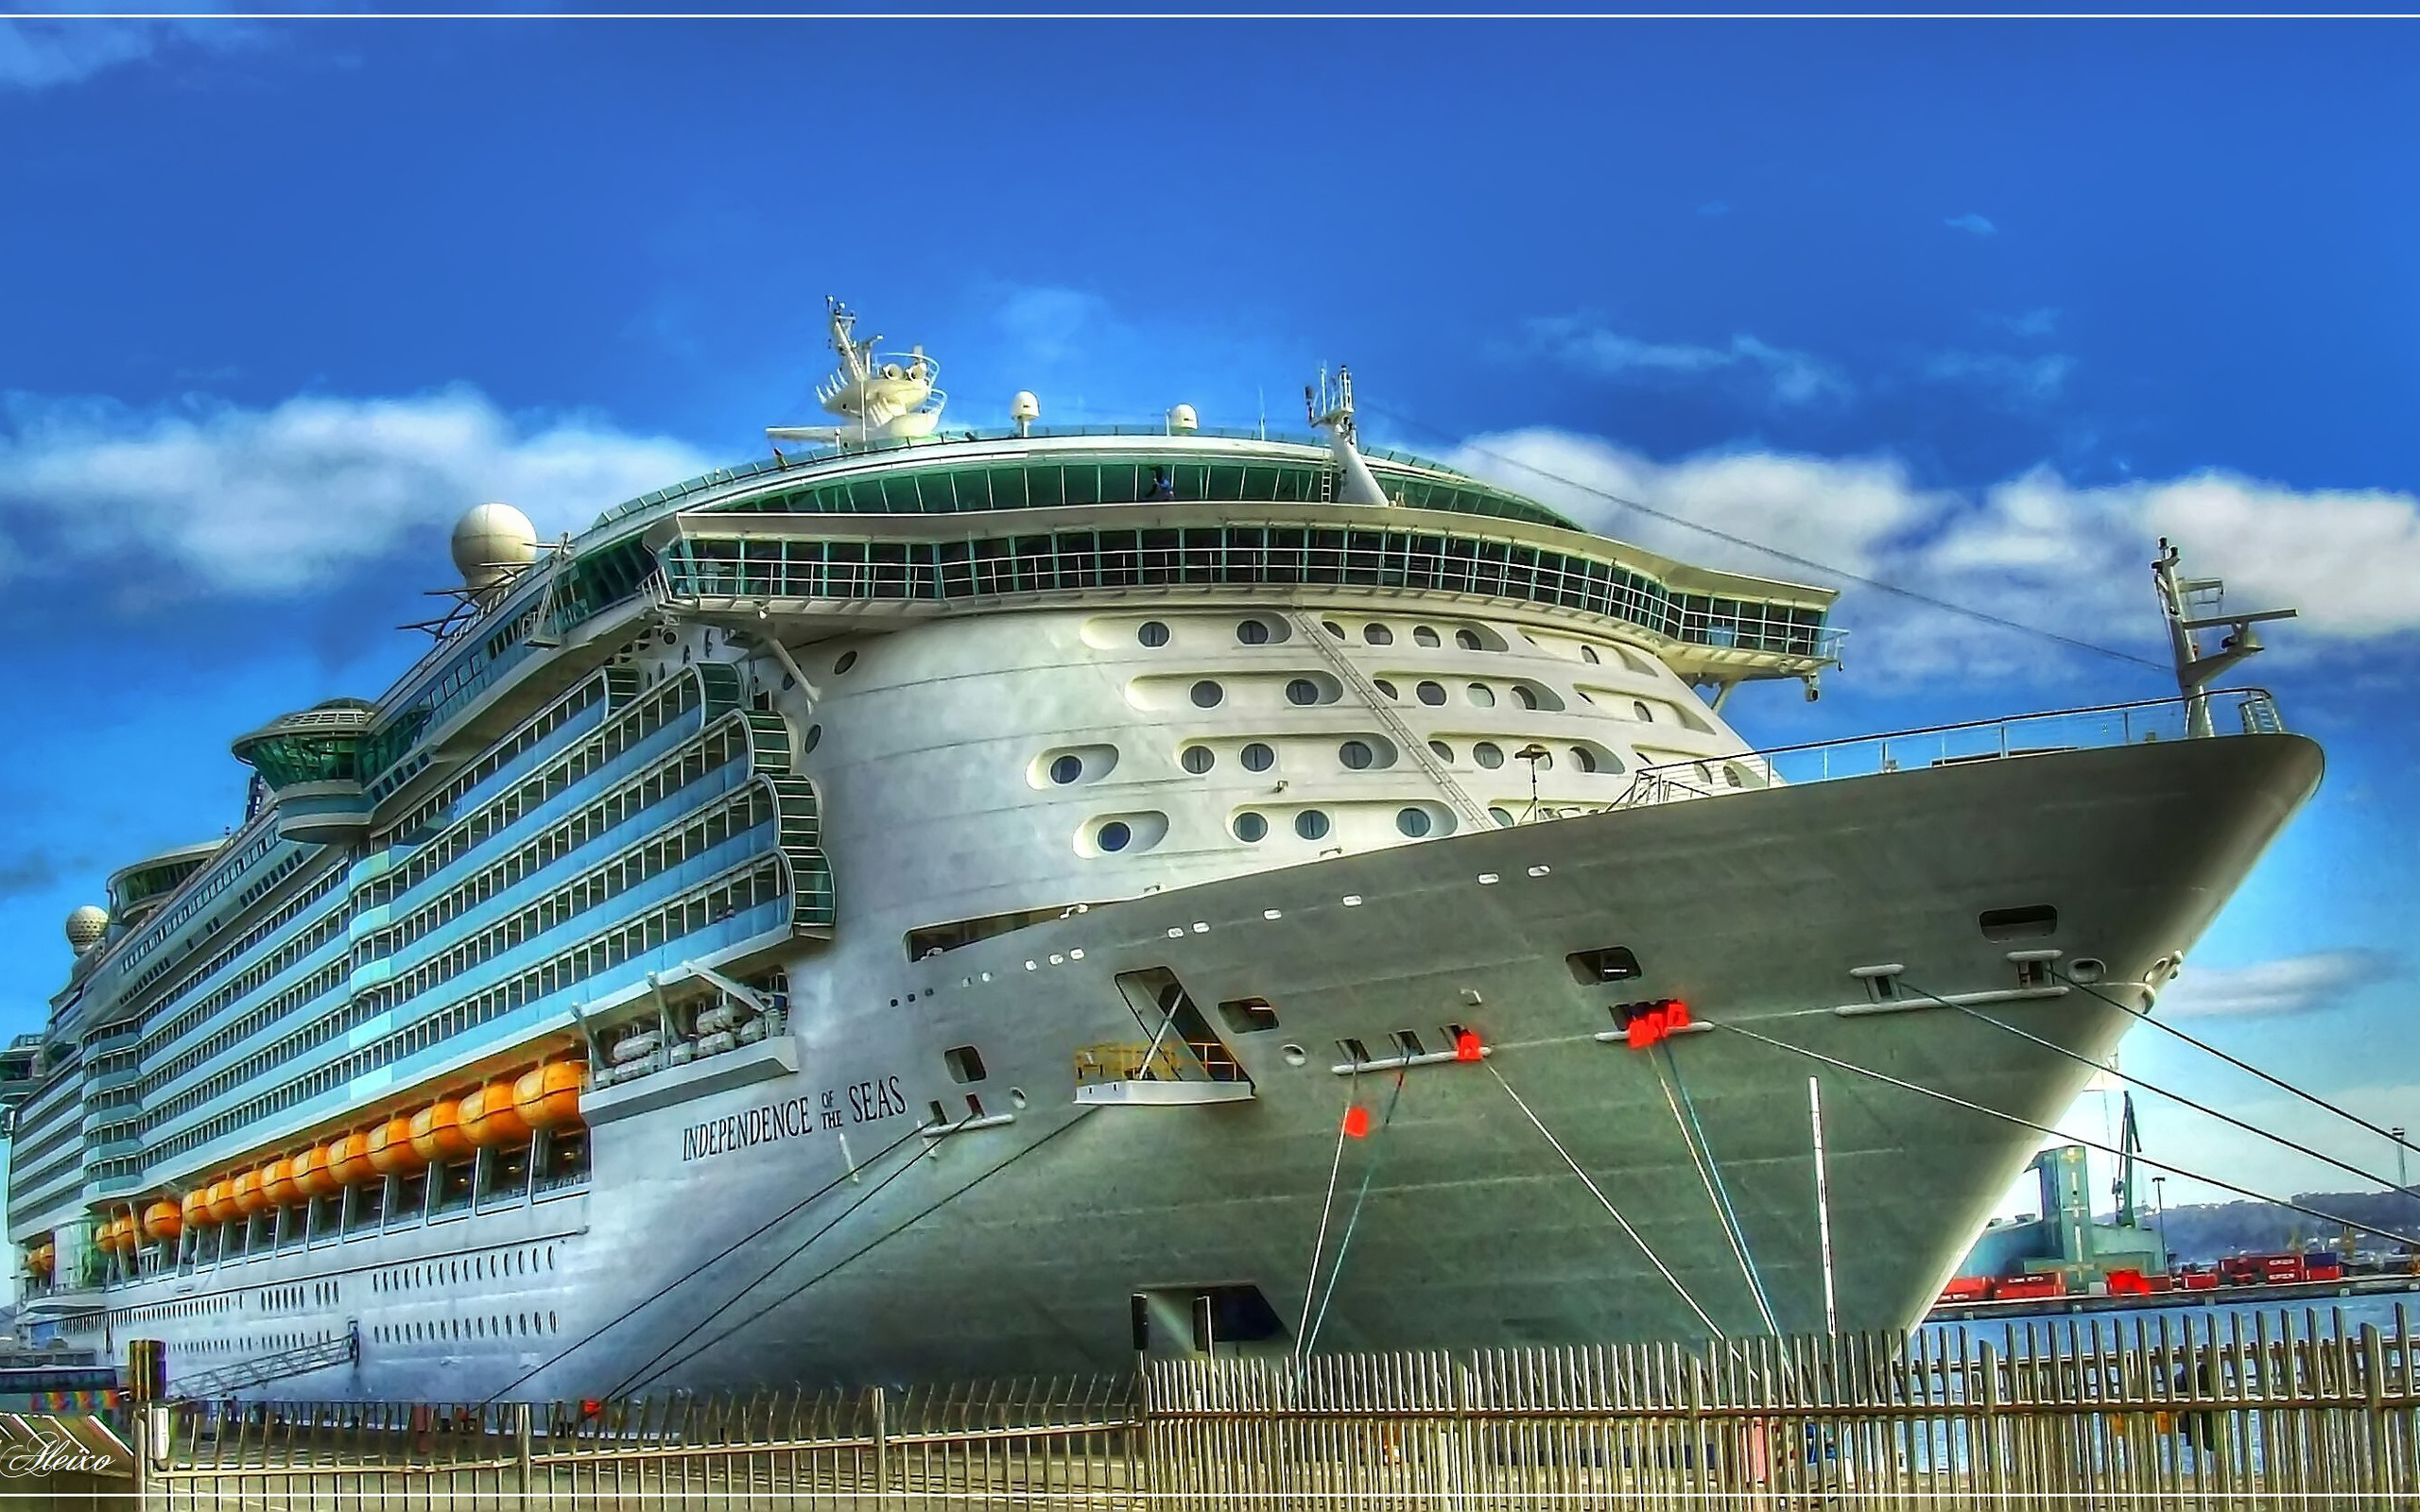 cruise ship, vehicles, independence of the seas, cruise ships